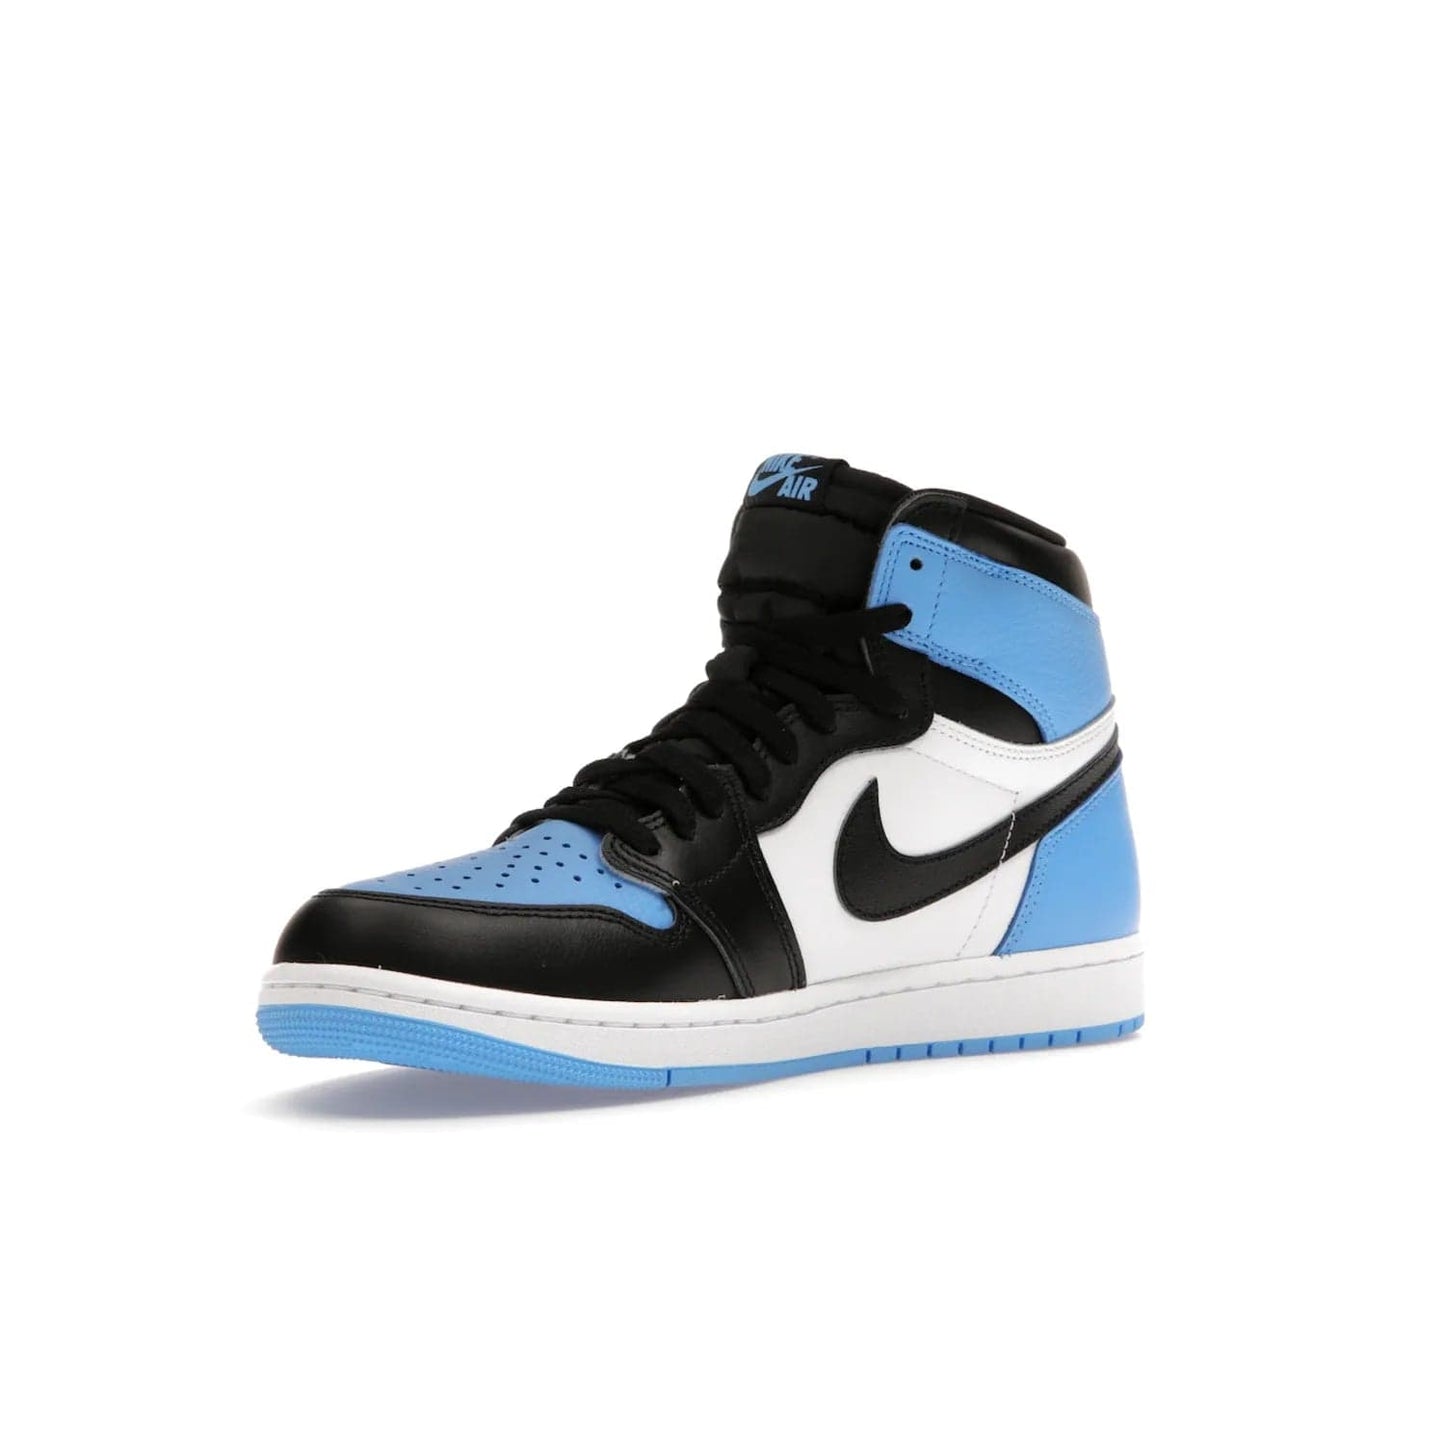 Jordan 1 Retro High OG UNC Toe - Image 15 - Only at www.BallersClubKickz.com - Jordan 1 High OG UNC Toe is a fashionable, high-quality sneaker featuring University Blue, Black White and White. Releasing July 22, 2023, it's the perfect pick up for sneakerheads.